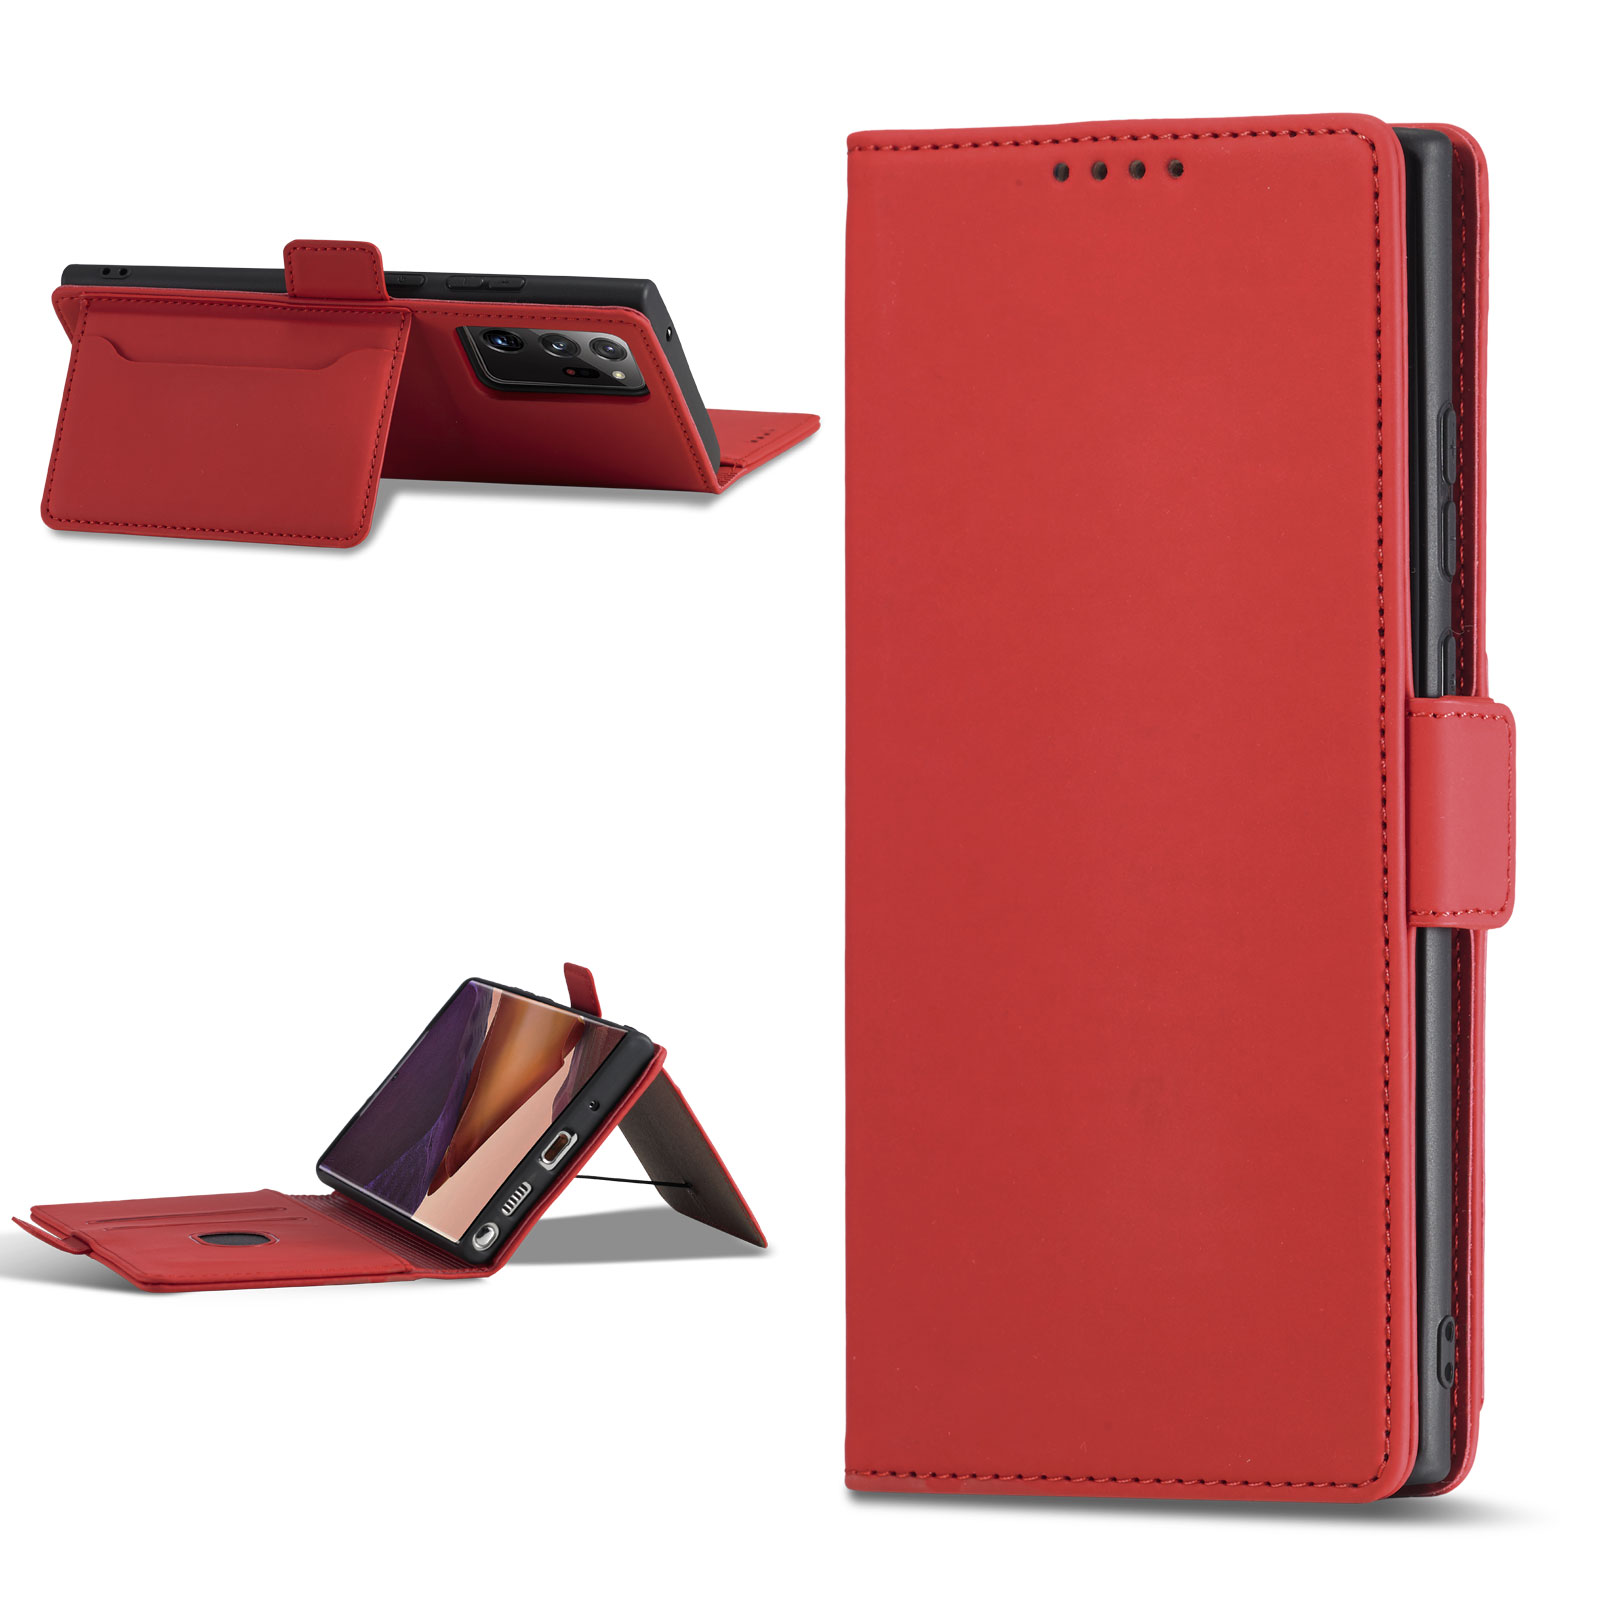 Bakeey-for-Samsung-Galaxy-Note-20-Case-Business-Flip-Magnetic-with-Multi-Card-Slots-Wallet-Shockproo-1763271-16